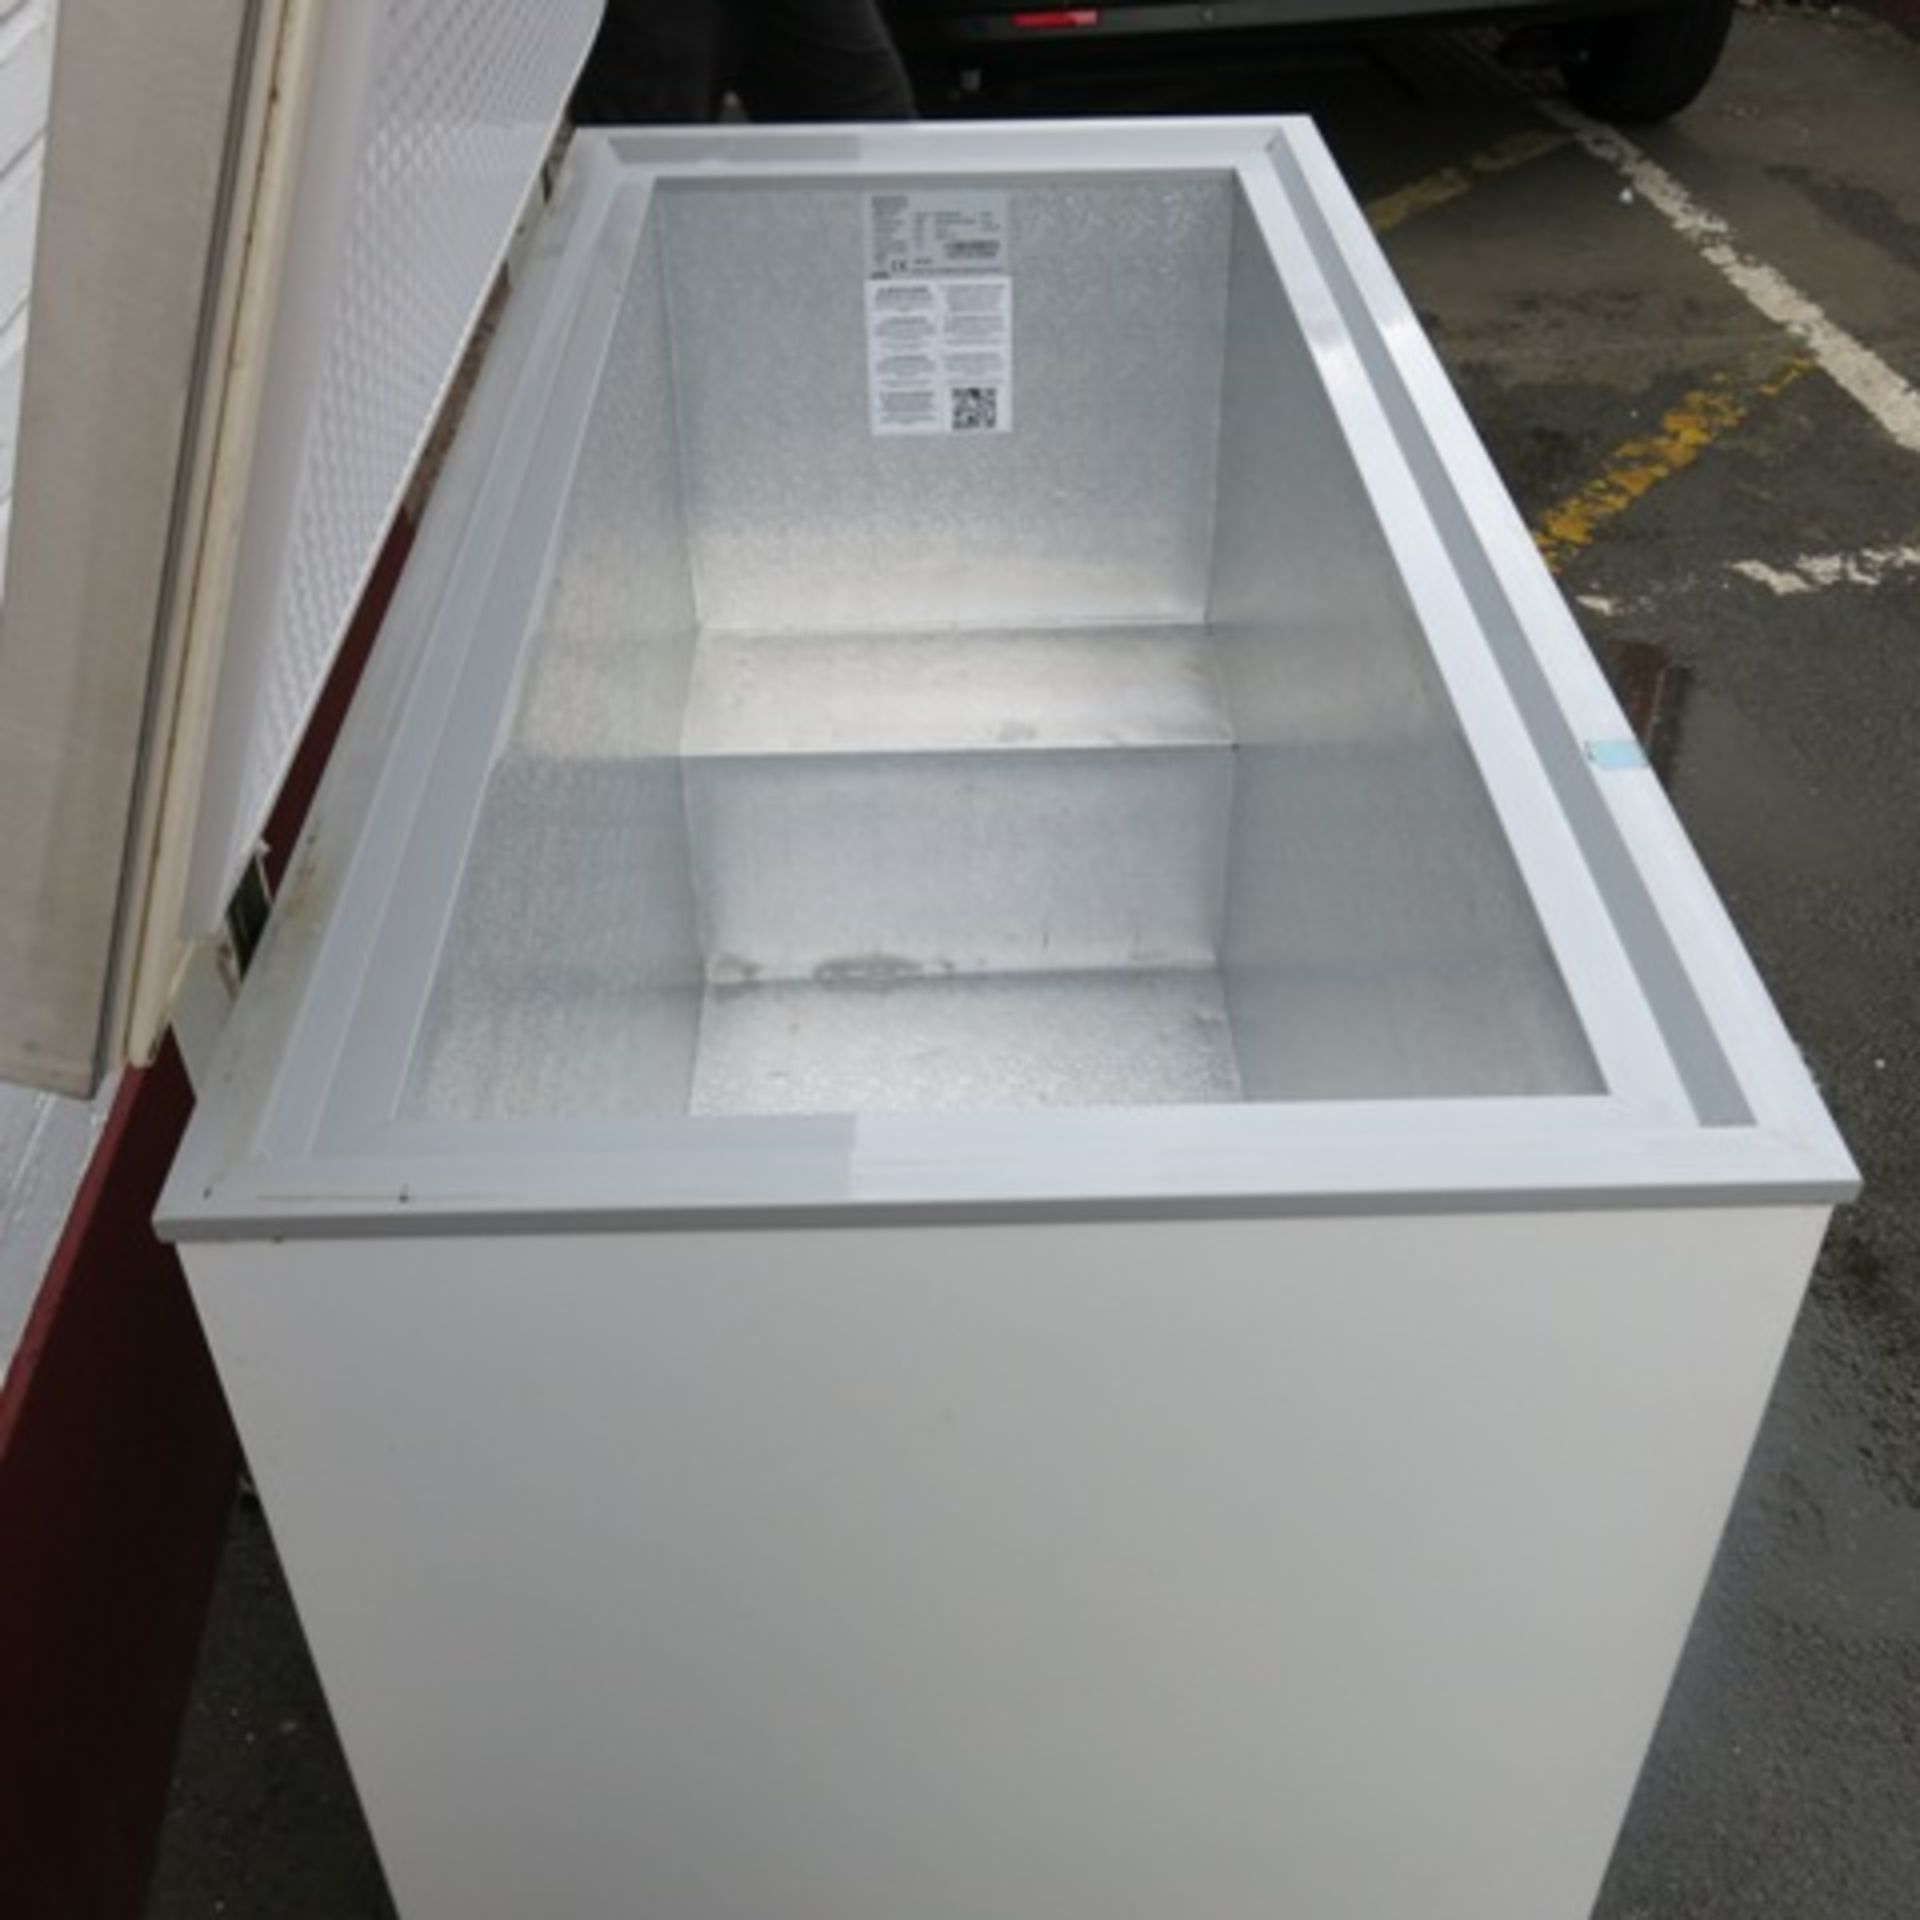 Polar Chest Freezer with Stainless Steel Top. Model CE210-B. Size (H) 89cm x (W) 213cm x (D) 70cm. - Image 6 of 10